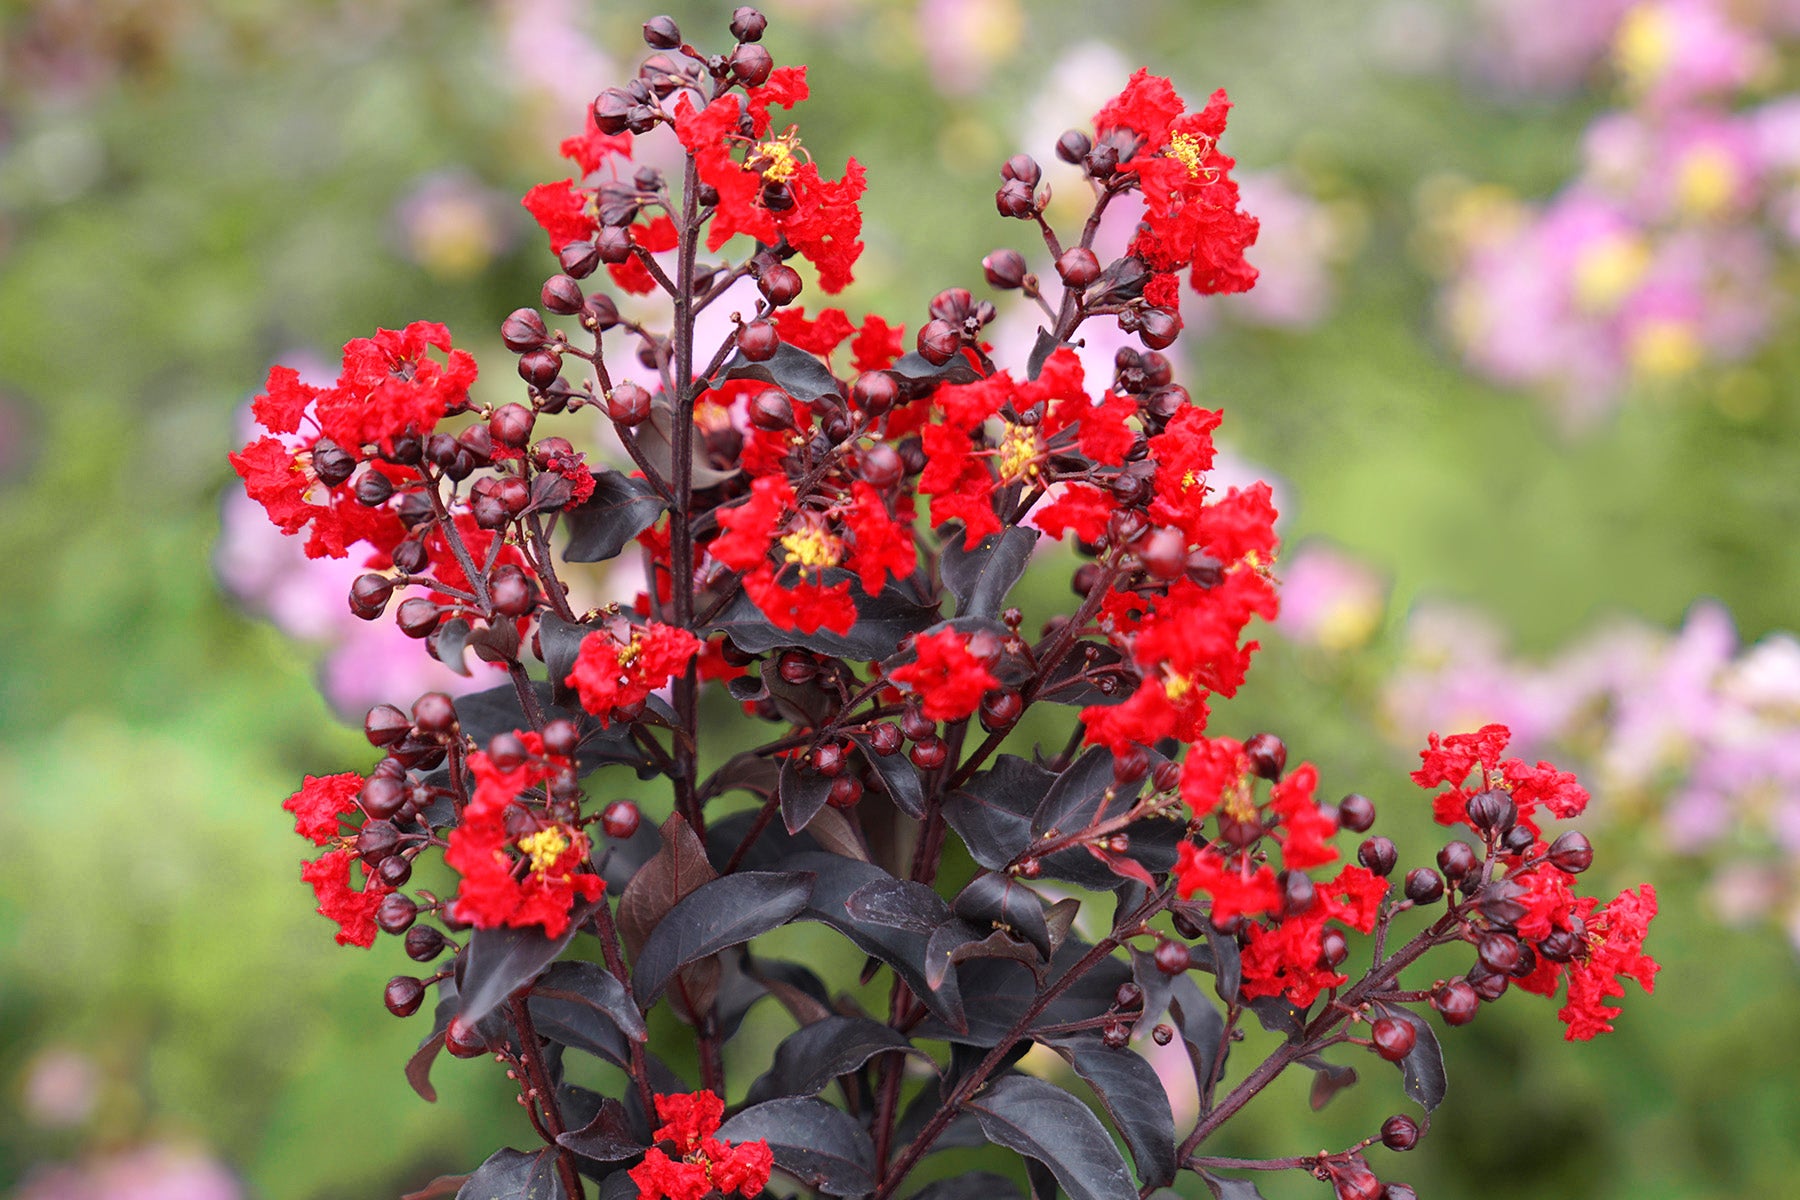 This Crape Myrtle, has stunning scarlet flowering blossoms on each stem and qualifies to take Center Stage as an outstanding ornamental. Here, it emphasizes its vivid red color against dark, near black foliage and its buds.